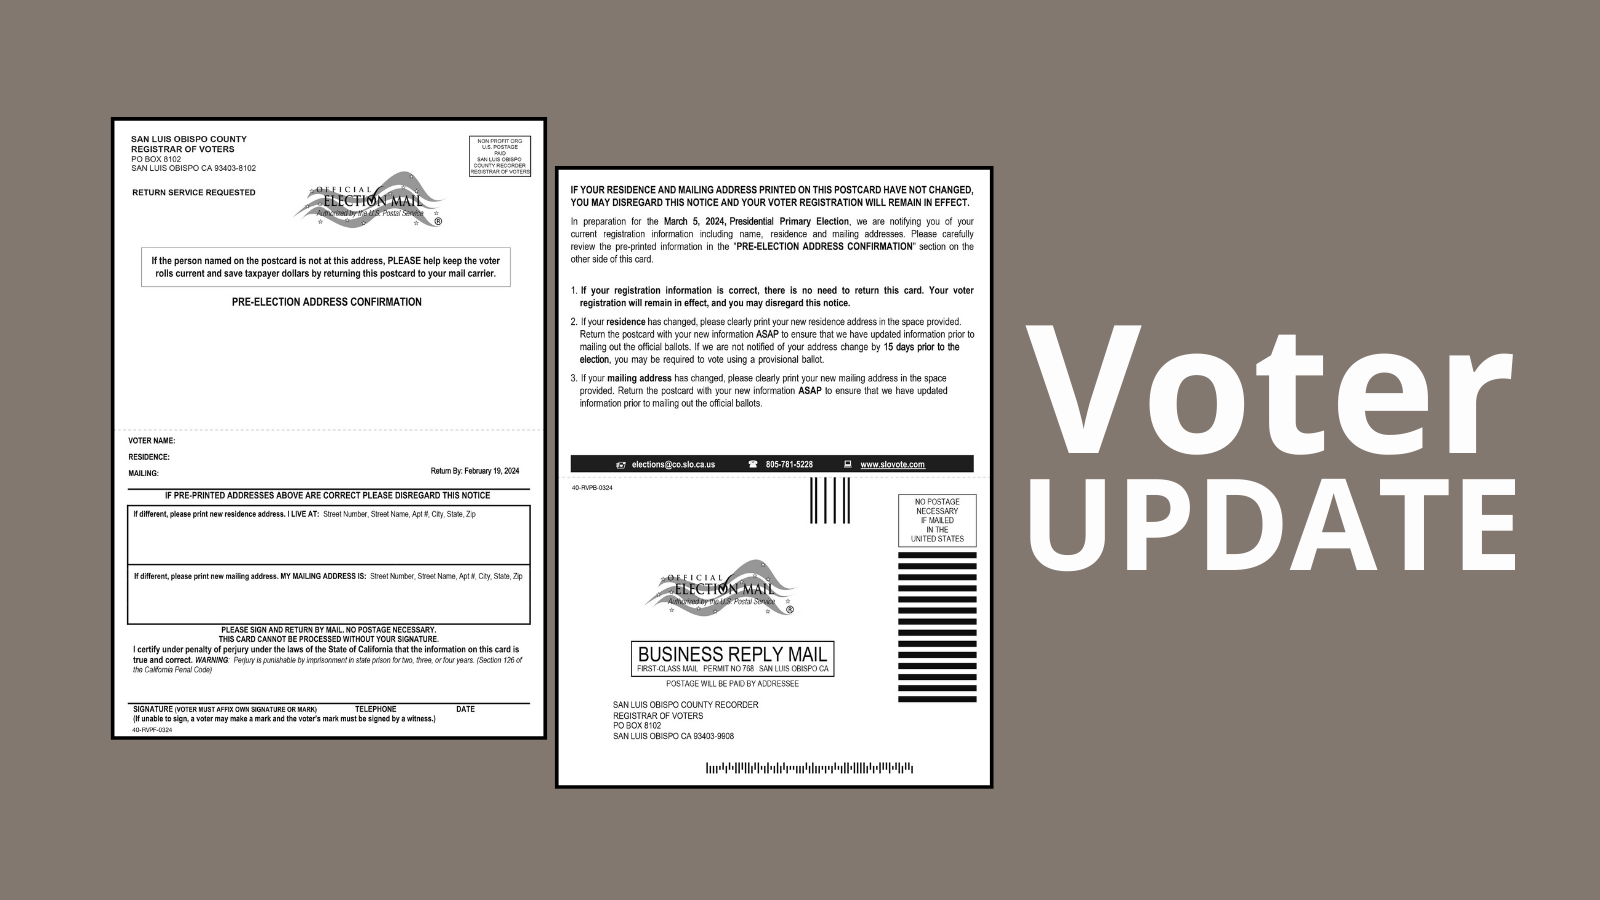 An image of a postcard that contains address confirmation information next to text that reads Voter Update